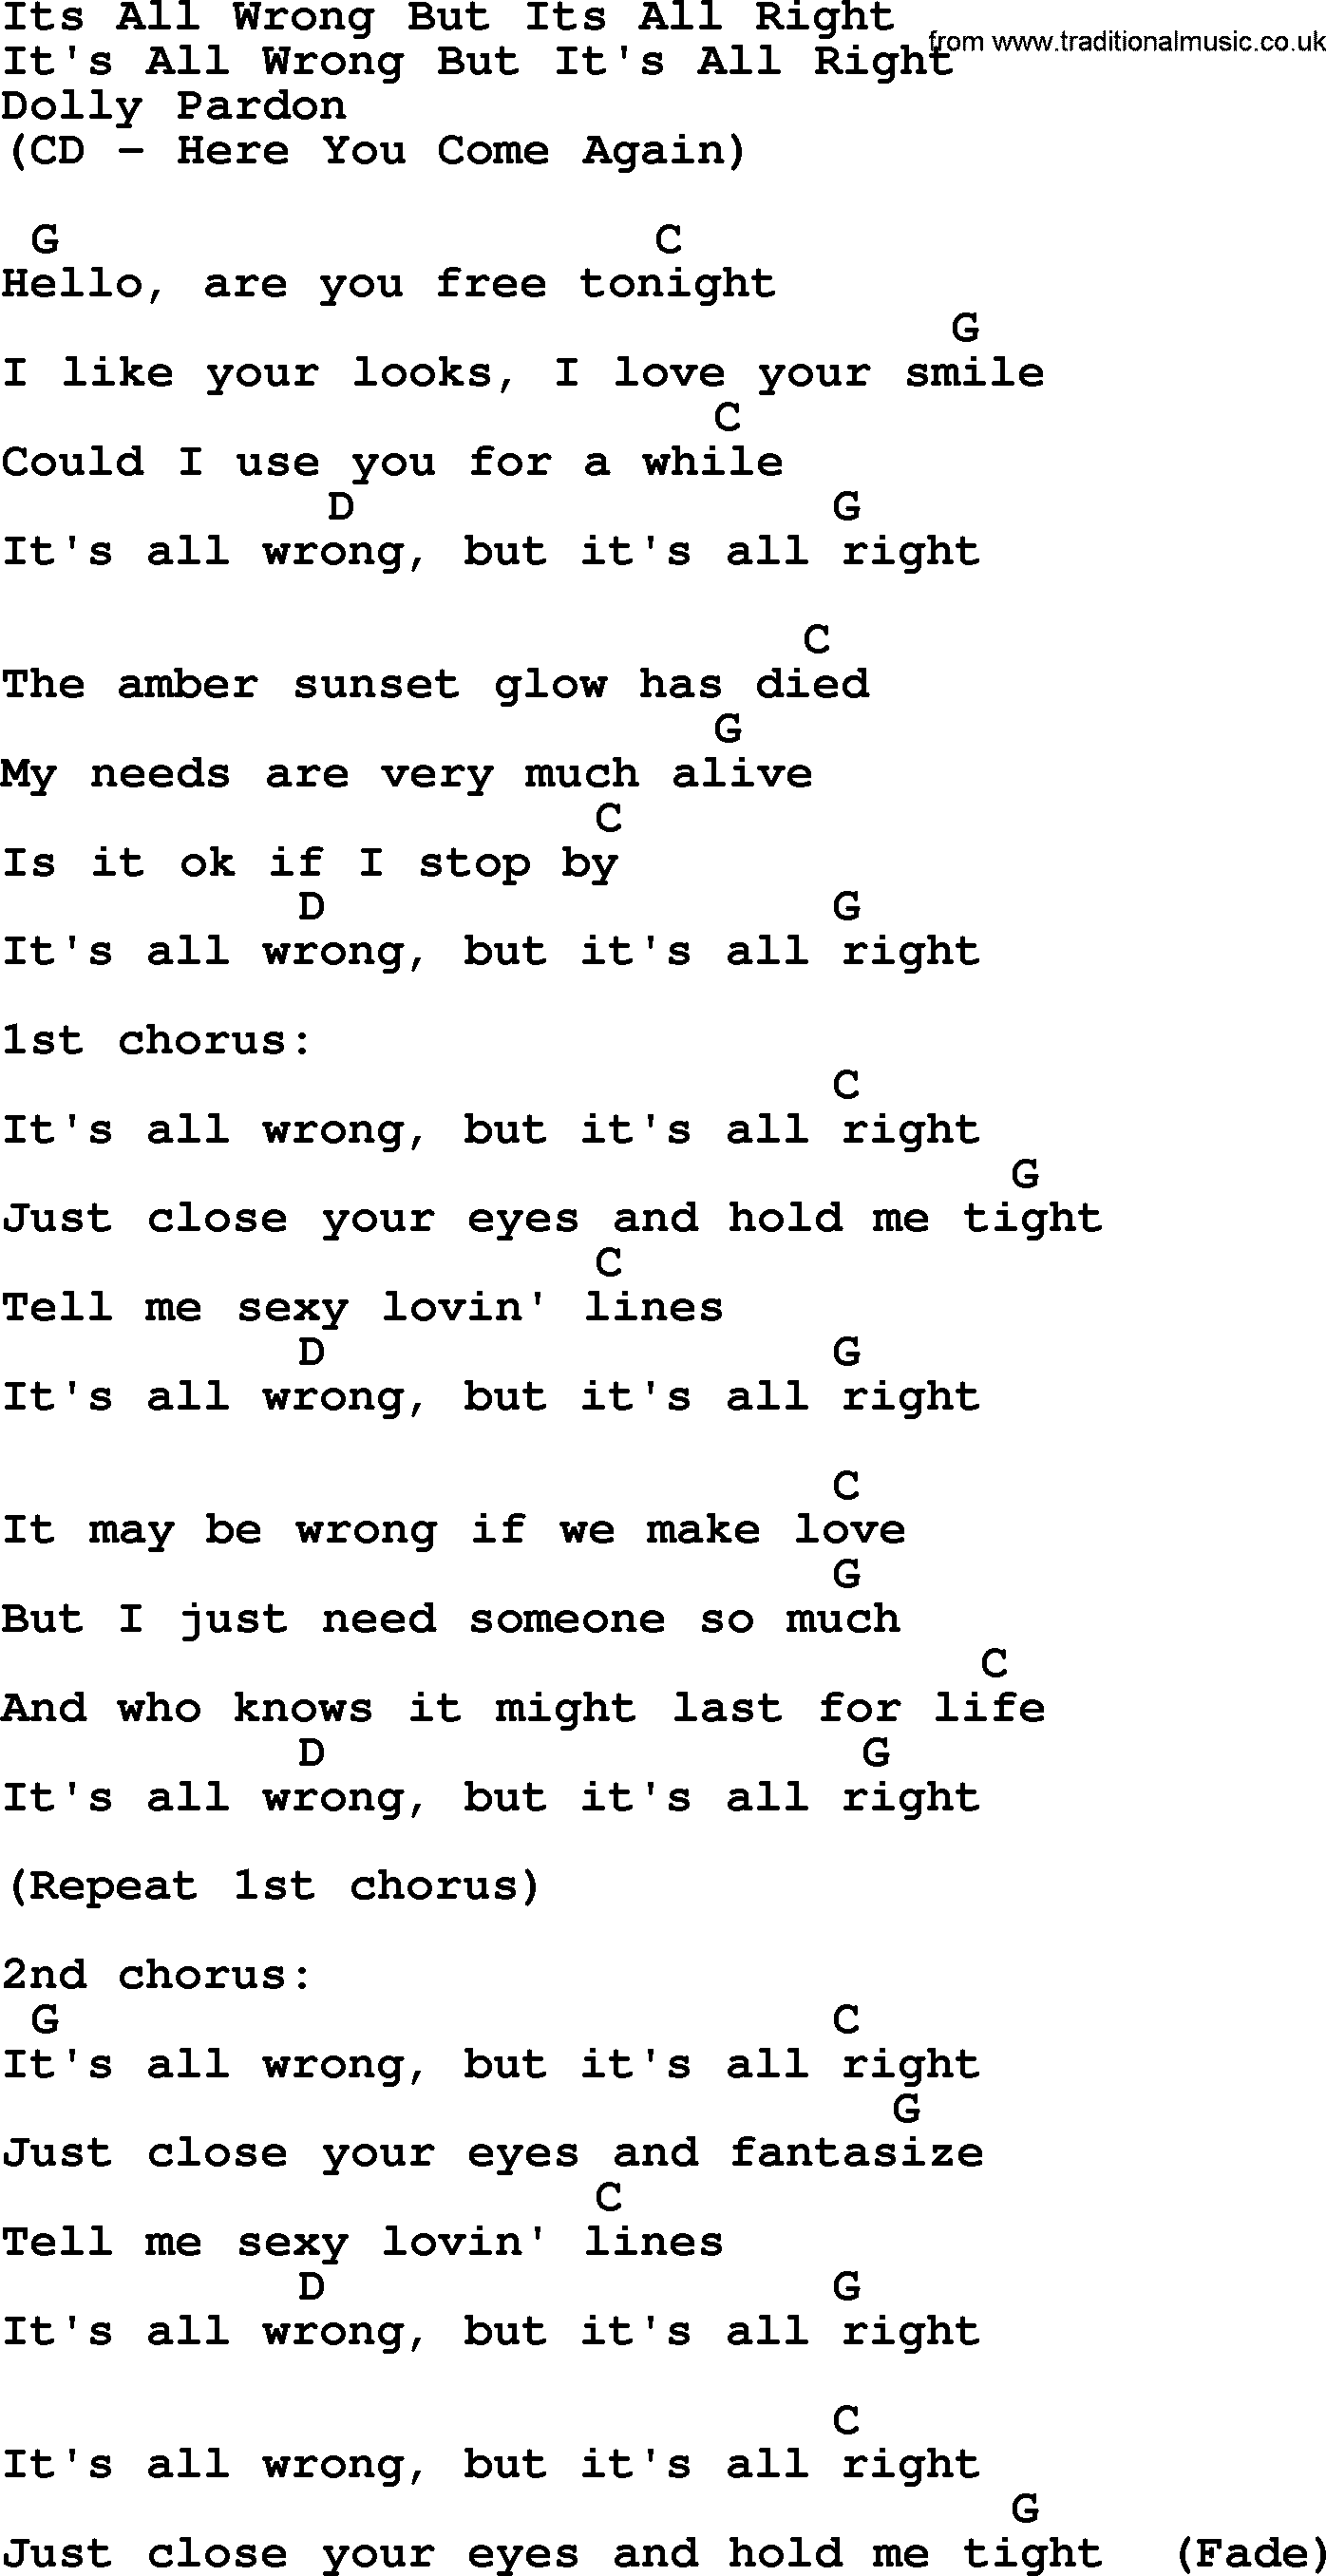 Bluegrass song: Its All Wrong But Its All Right, lyrics and chords